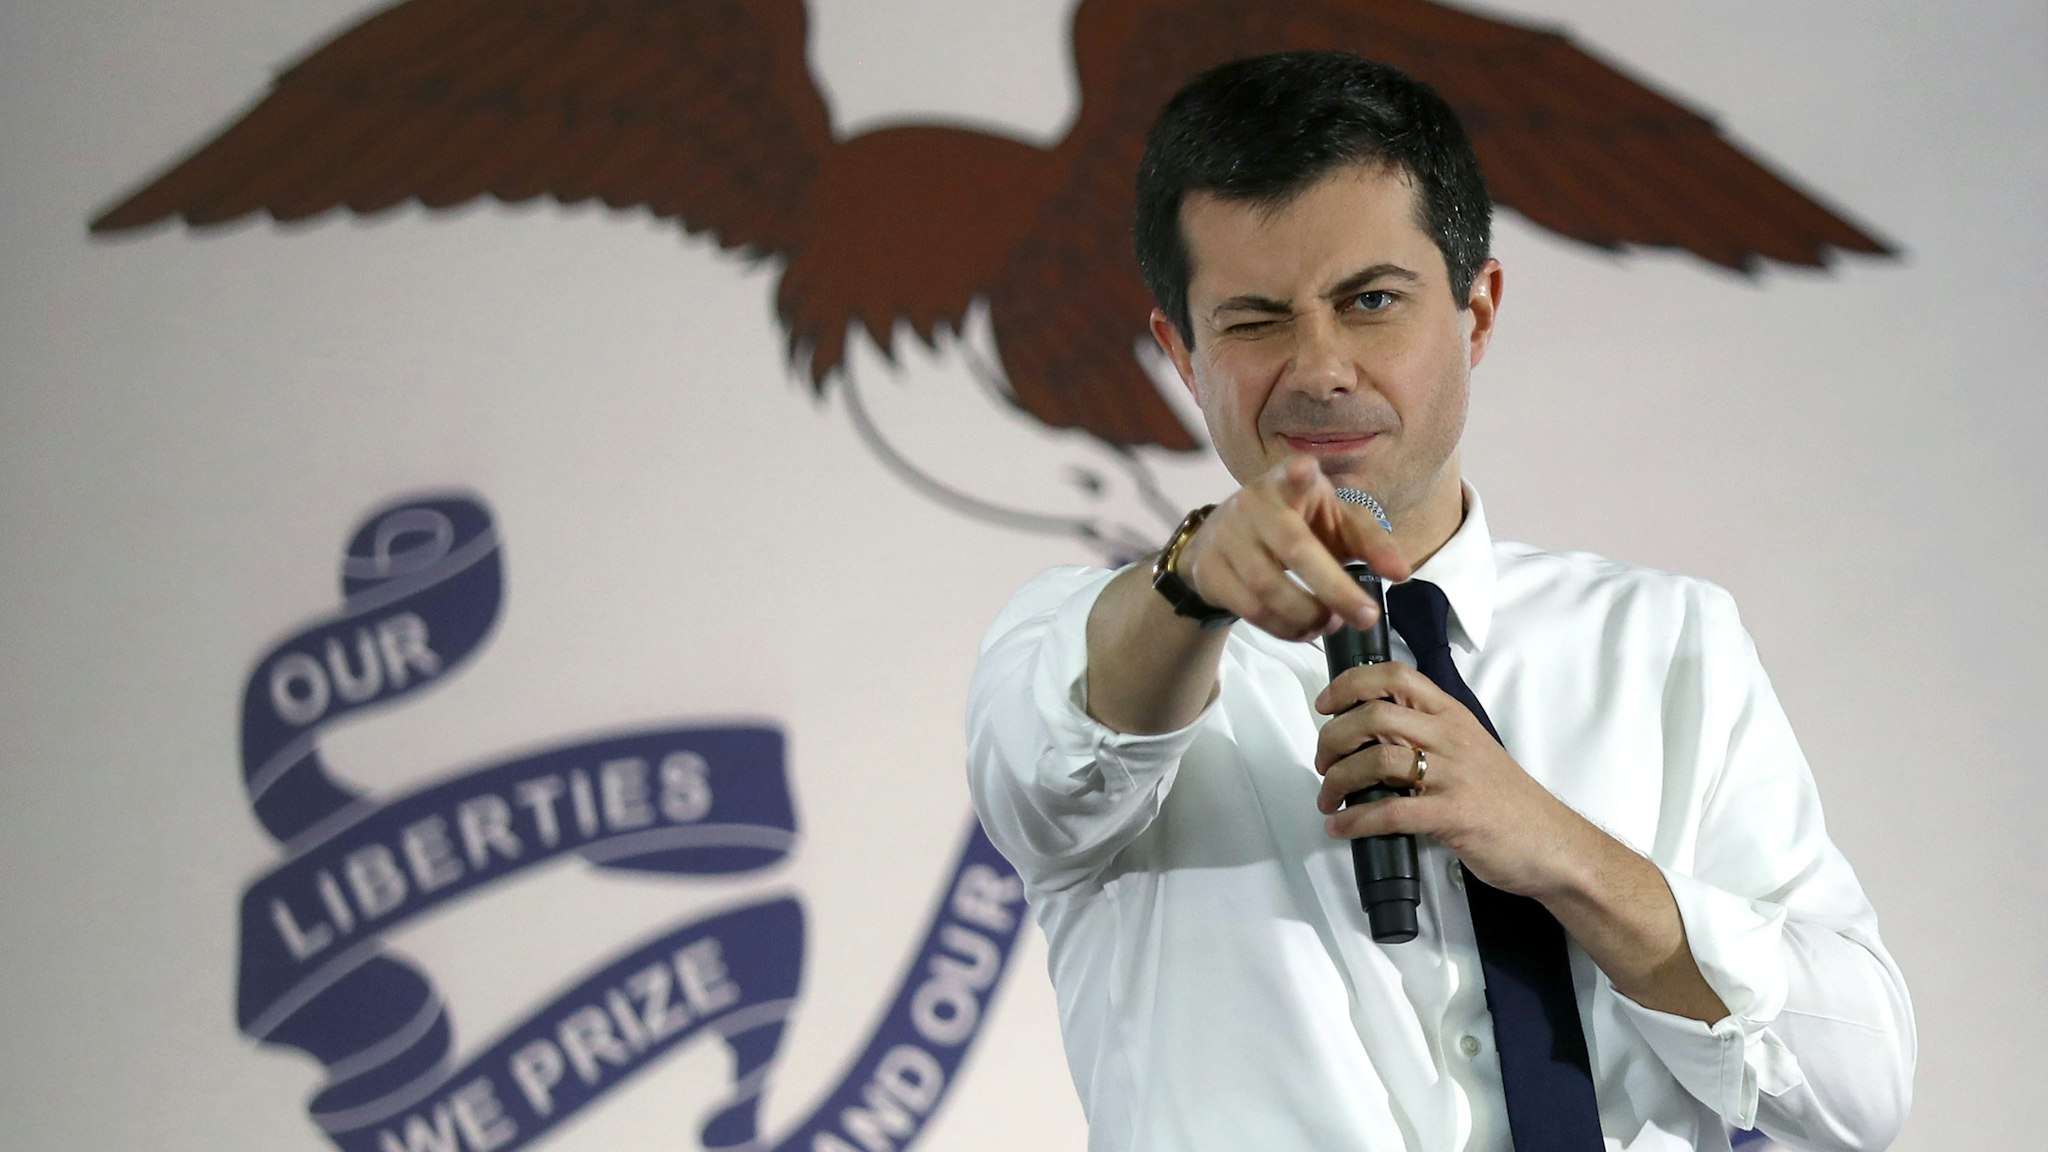 KNOXVILLE, IOWA - DECEMBER 29: Democratic presidential candidate South Bend, Indiana Mayor Pete Buttigieg speaks during a campaign event in the The Skate Pit on December 29, 2019 in Knoxville, Iowa. The 2020 Iowa Democratic caucuses will take place on February 3, 2020, making it the first nominating contest for the Democratic Party in choosing their presidential candidate to face Donald Trump in the 2020 election. (Photo by Joe Raedle/Getty Images)